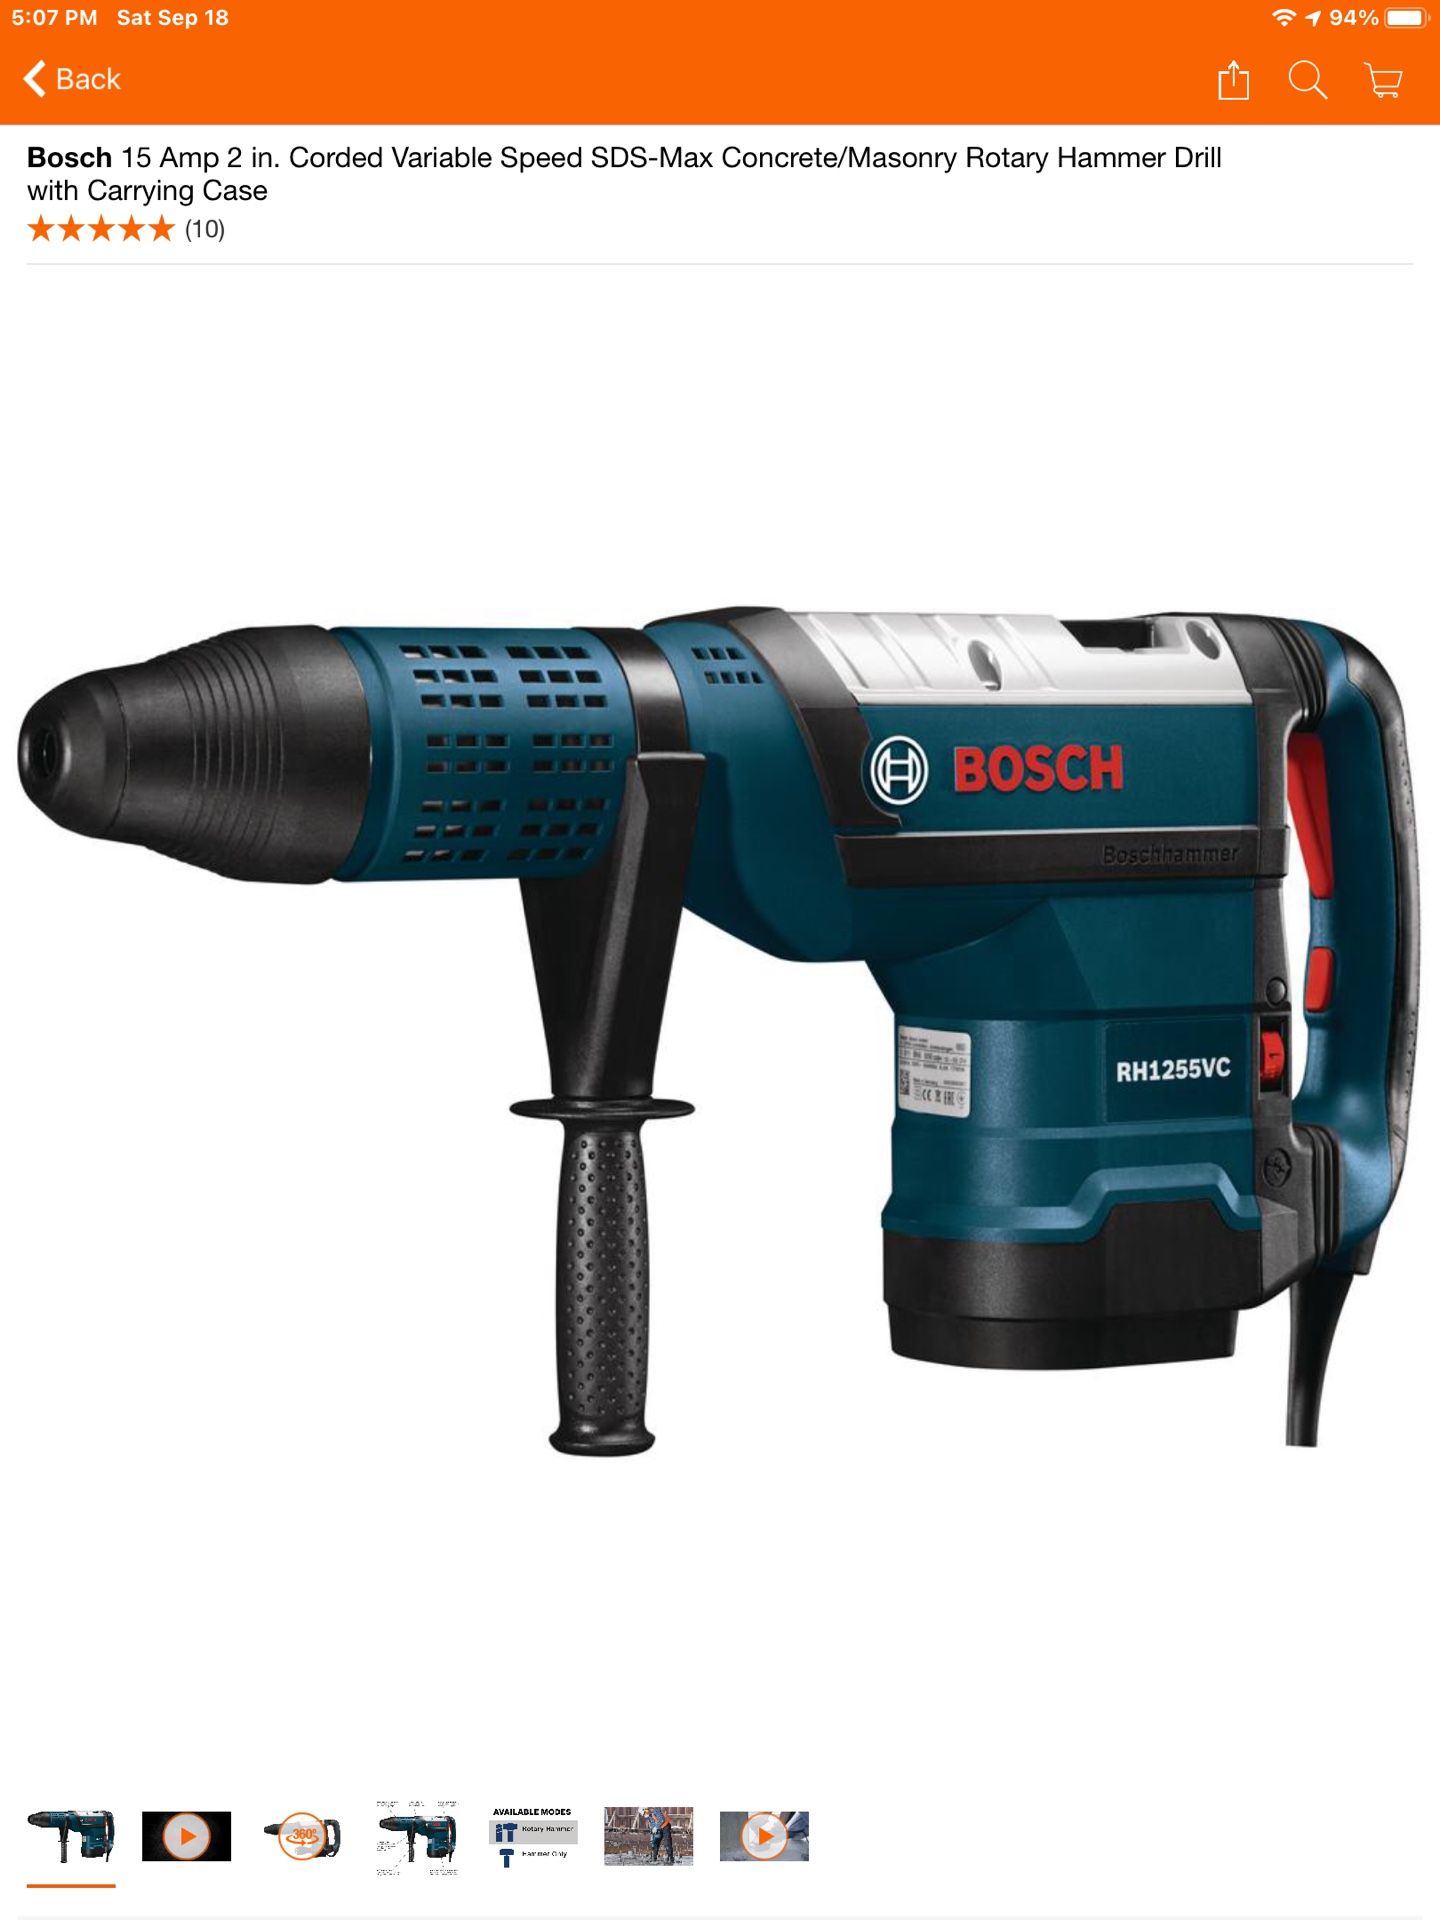 Bosch RH1255VC 15 Amp 2 in. Corded Variable Speed SDS-Max Concrete/Masonry Rotary Hammer Drill 